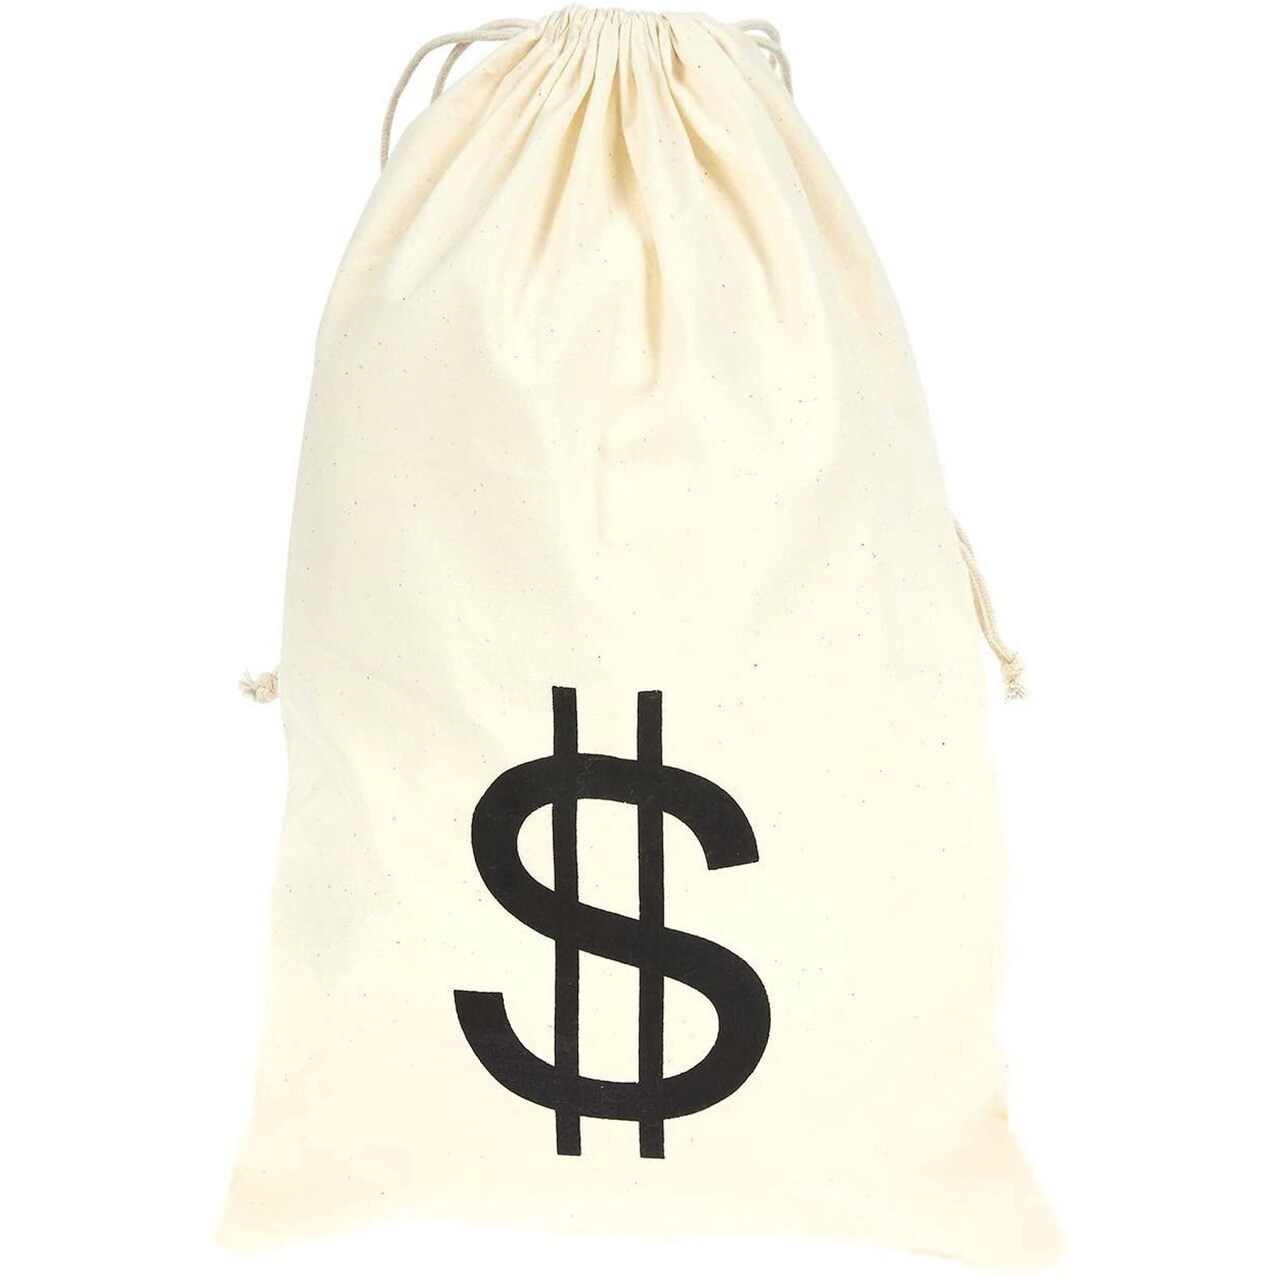 Large Fake Money Drawstring Bag Pouch with Dollar Sign Design, Humorous Party Favor Carry Bag, Cream, Robber - 16 x 11 inches